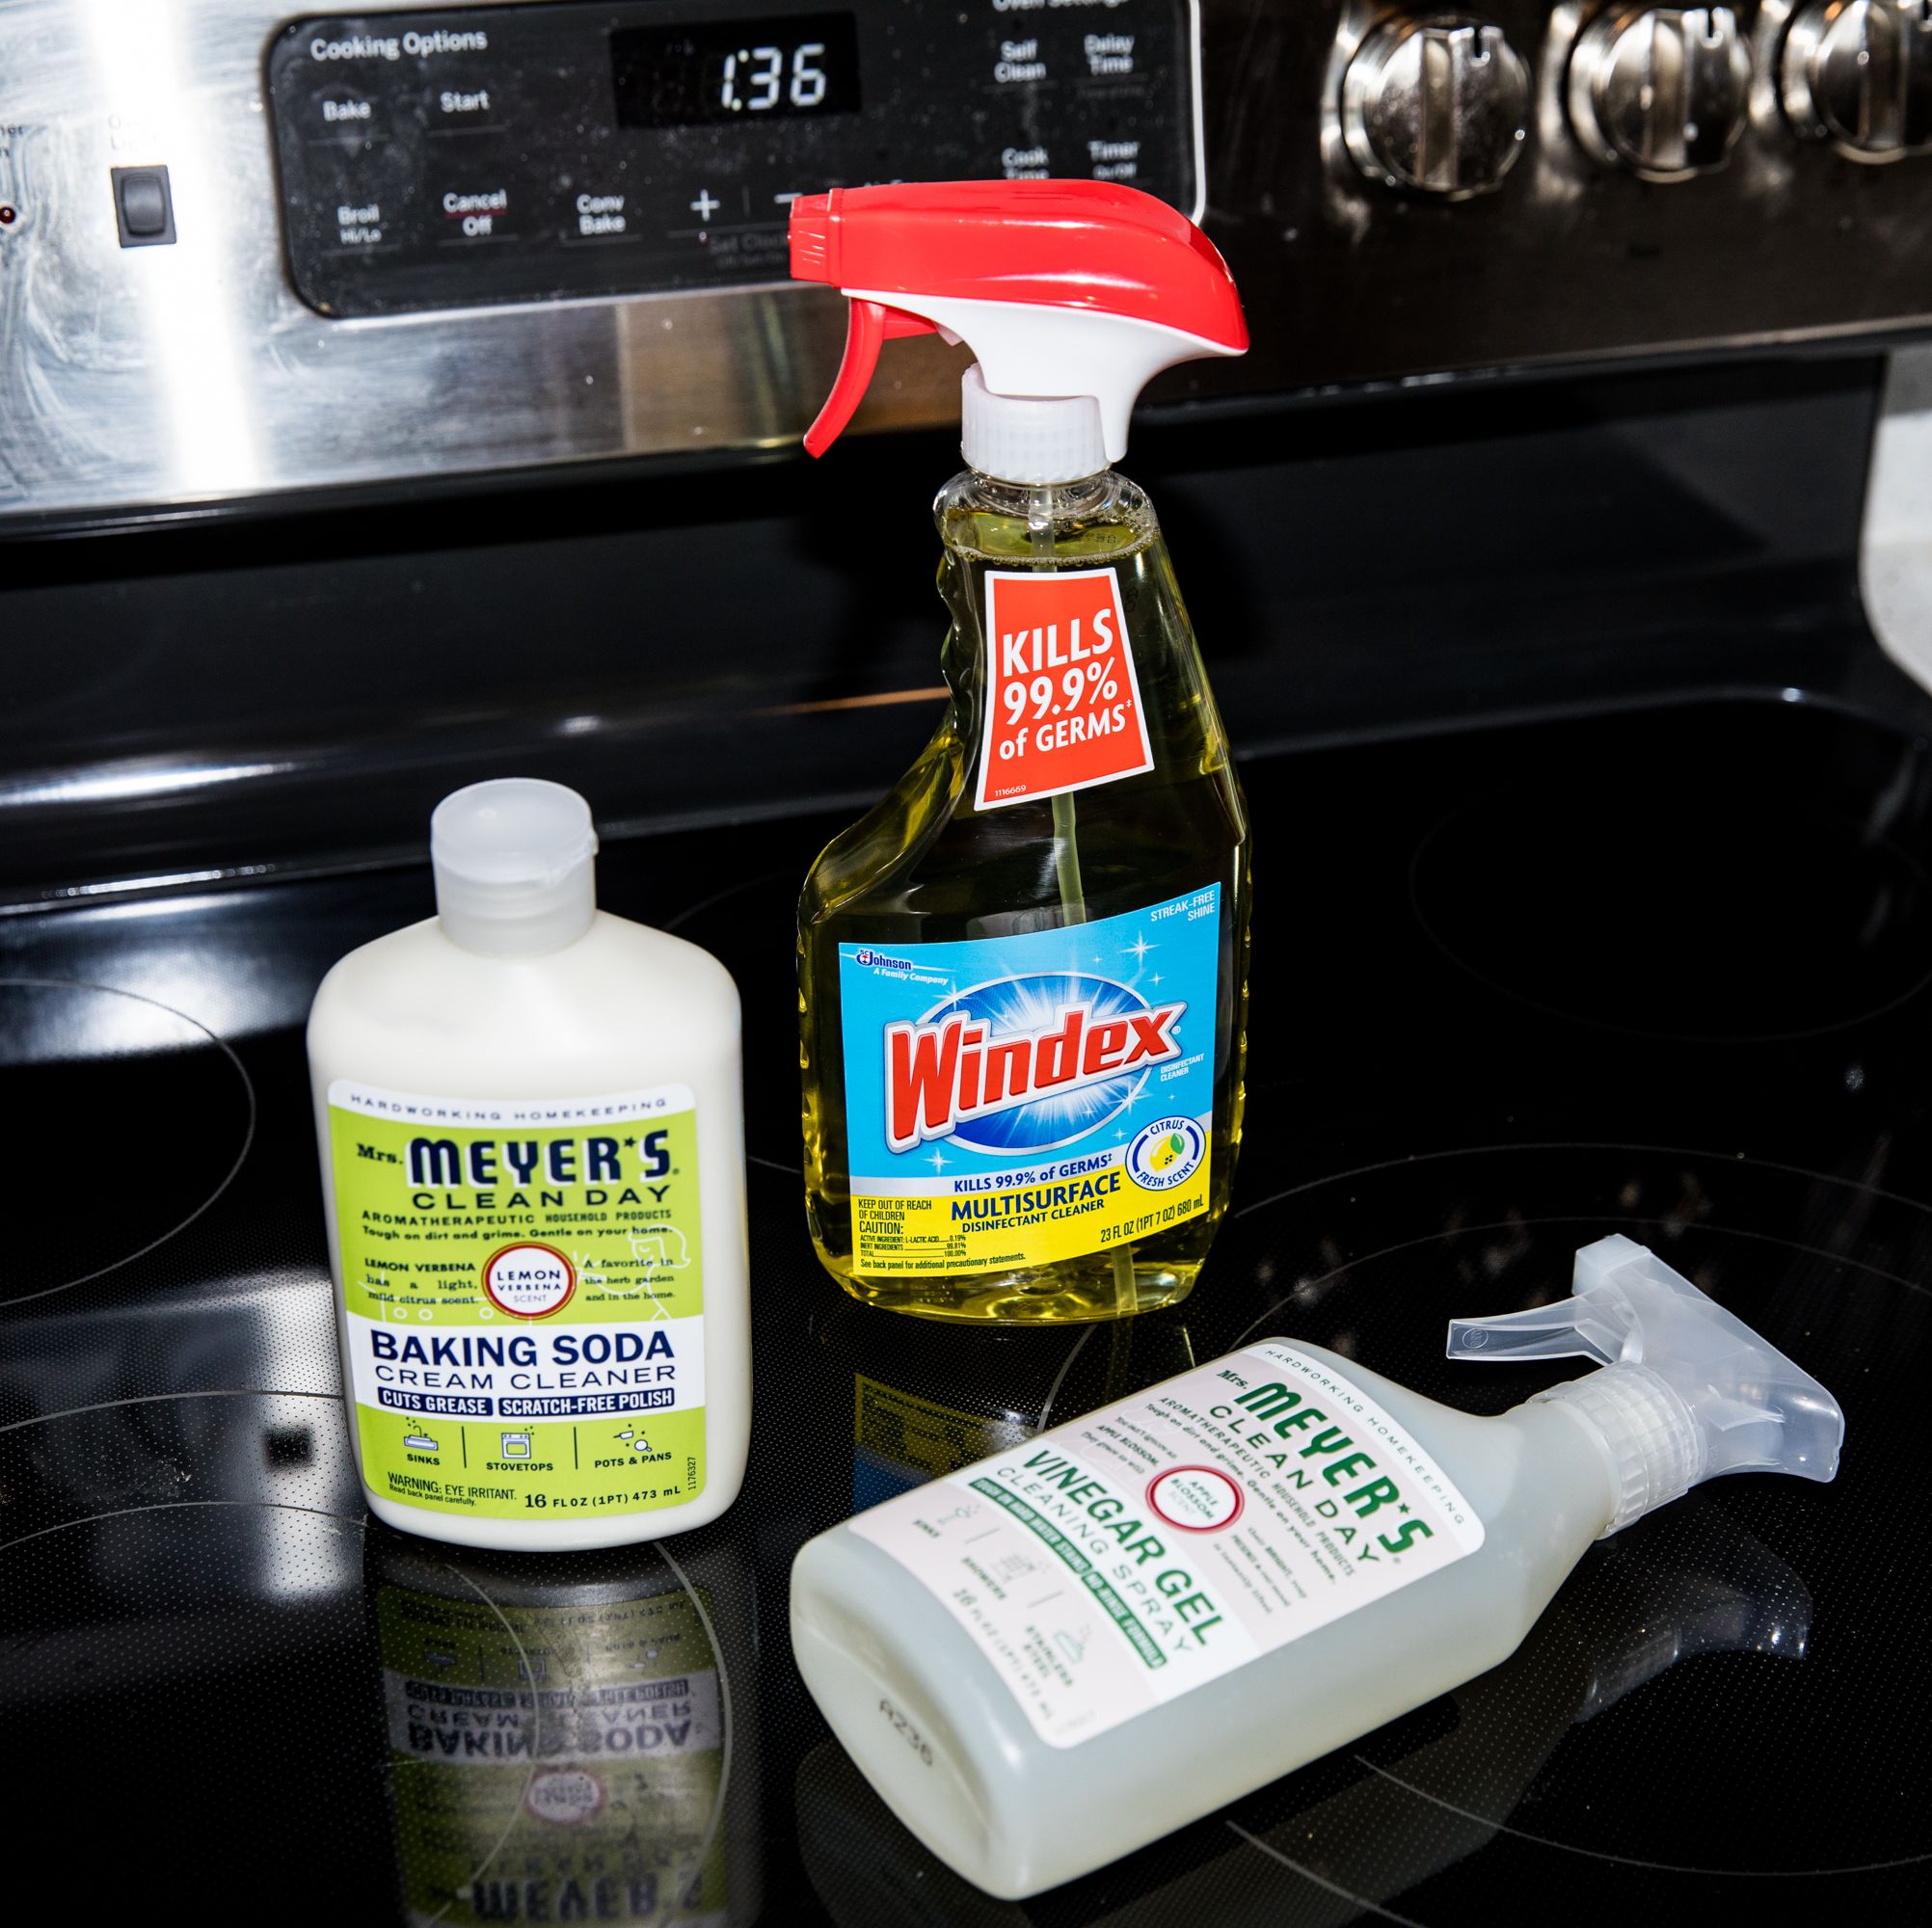 Scrub Every Surface In Your House Until It's Spotless With These Editor-Tested All Purpose Cleaners